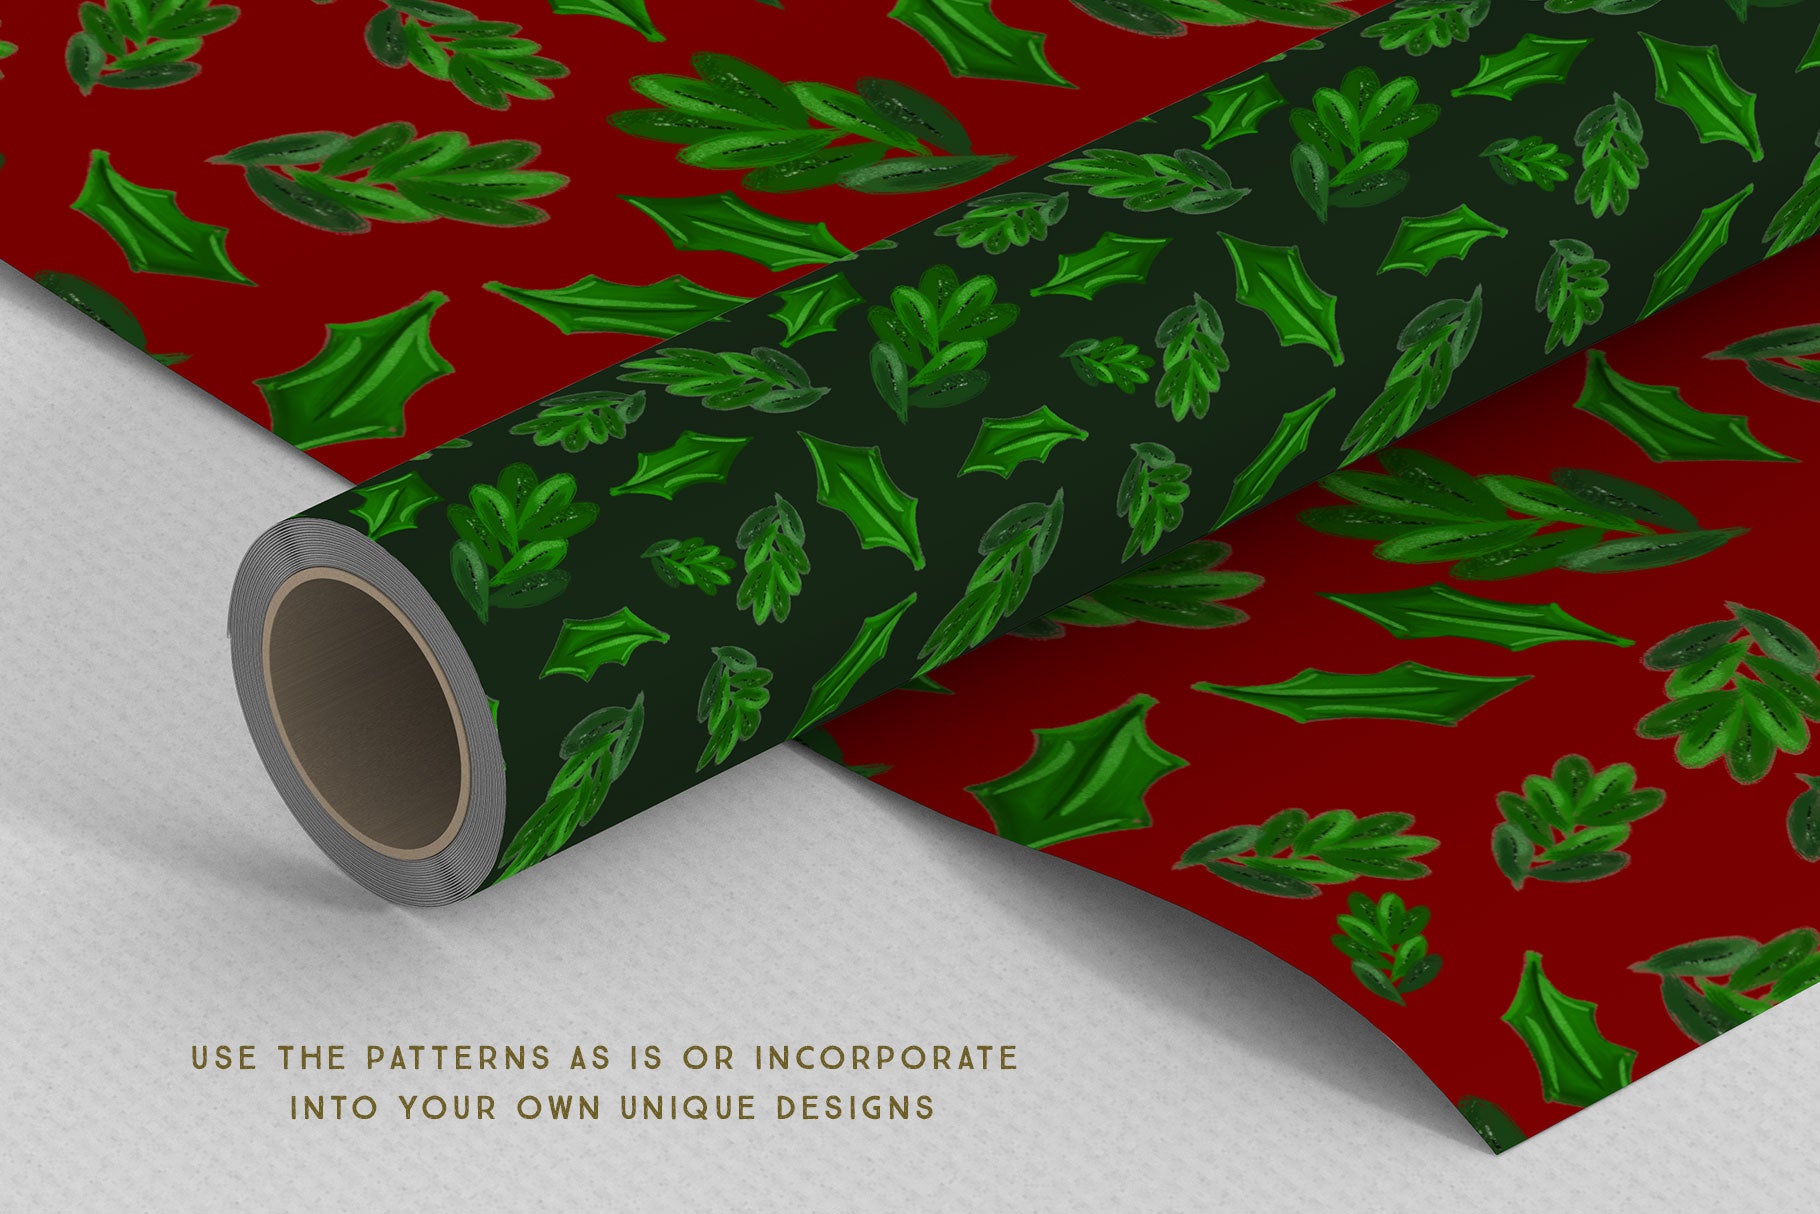 Luxe Christmas & Holiday Greenery Alphabets: make holiday wrapping paper